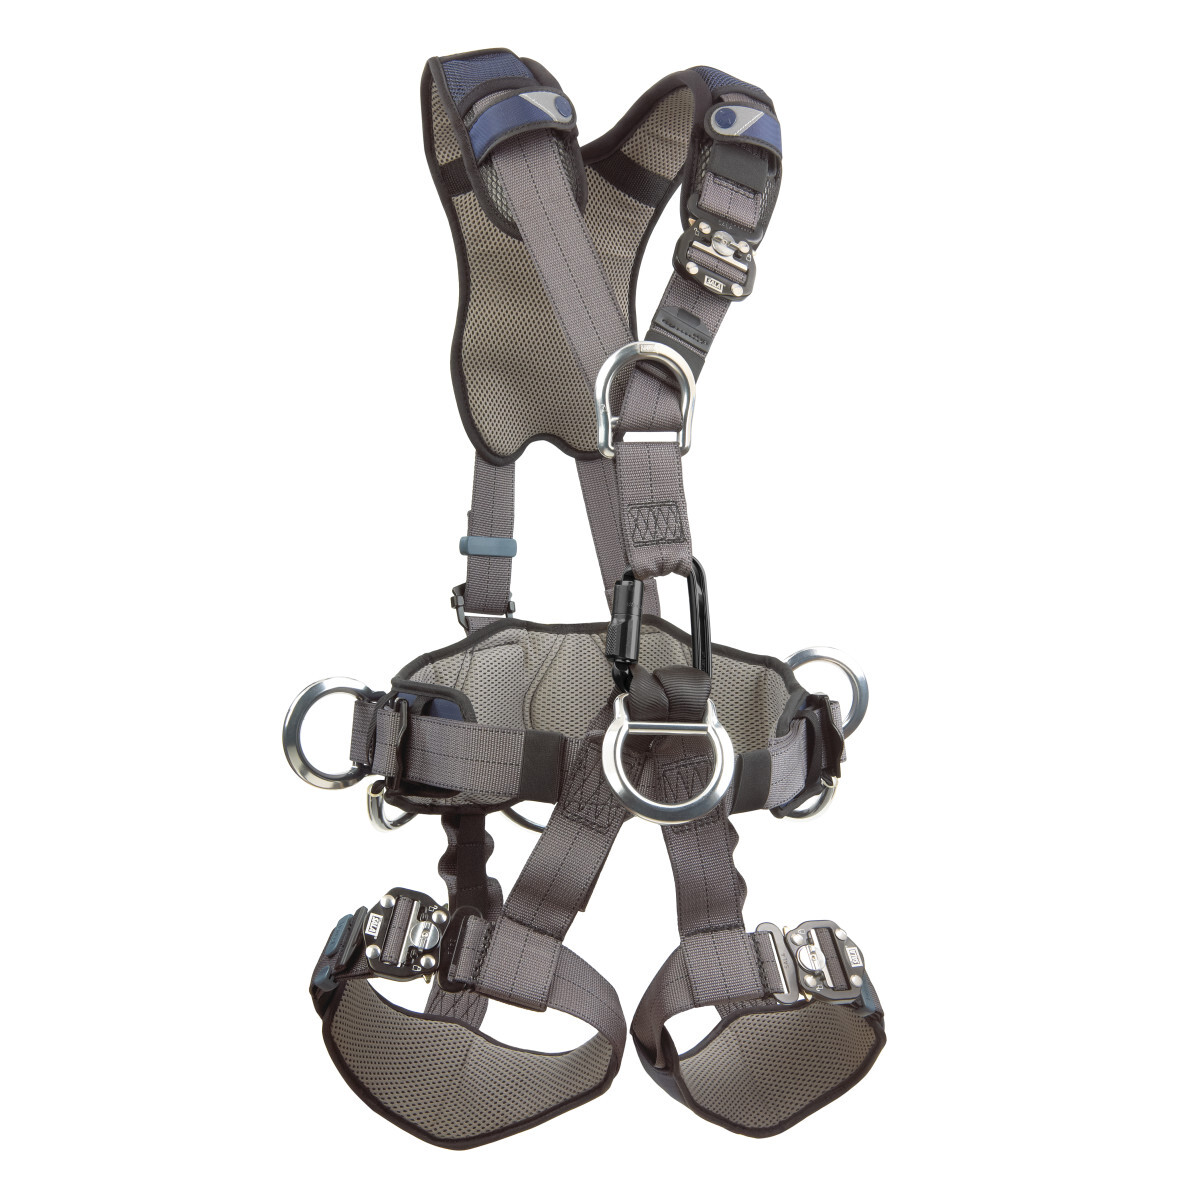 3M™ DBI-SALA® Large ExoFit NEX™ Full Body Style Harness With Back, Front, Suspension And Side D-Ring, Duo-Lok™ Quick Connect Che